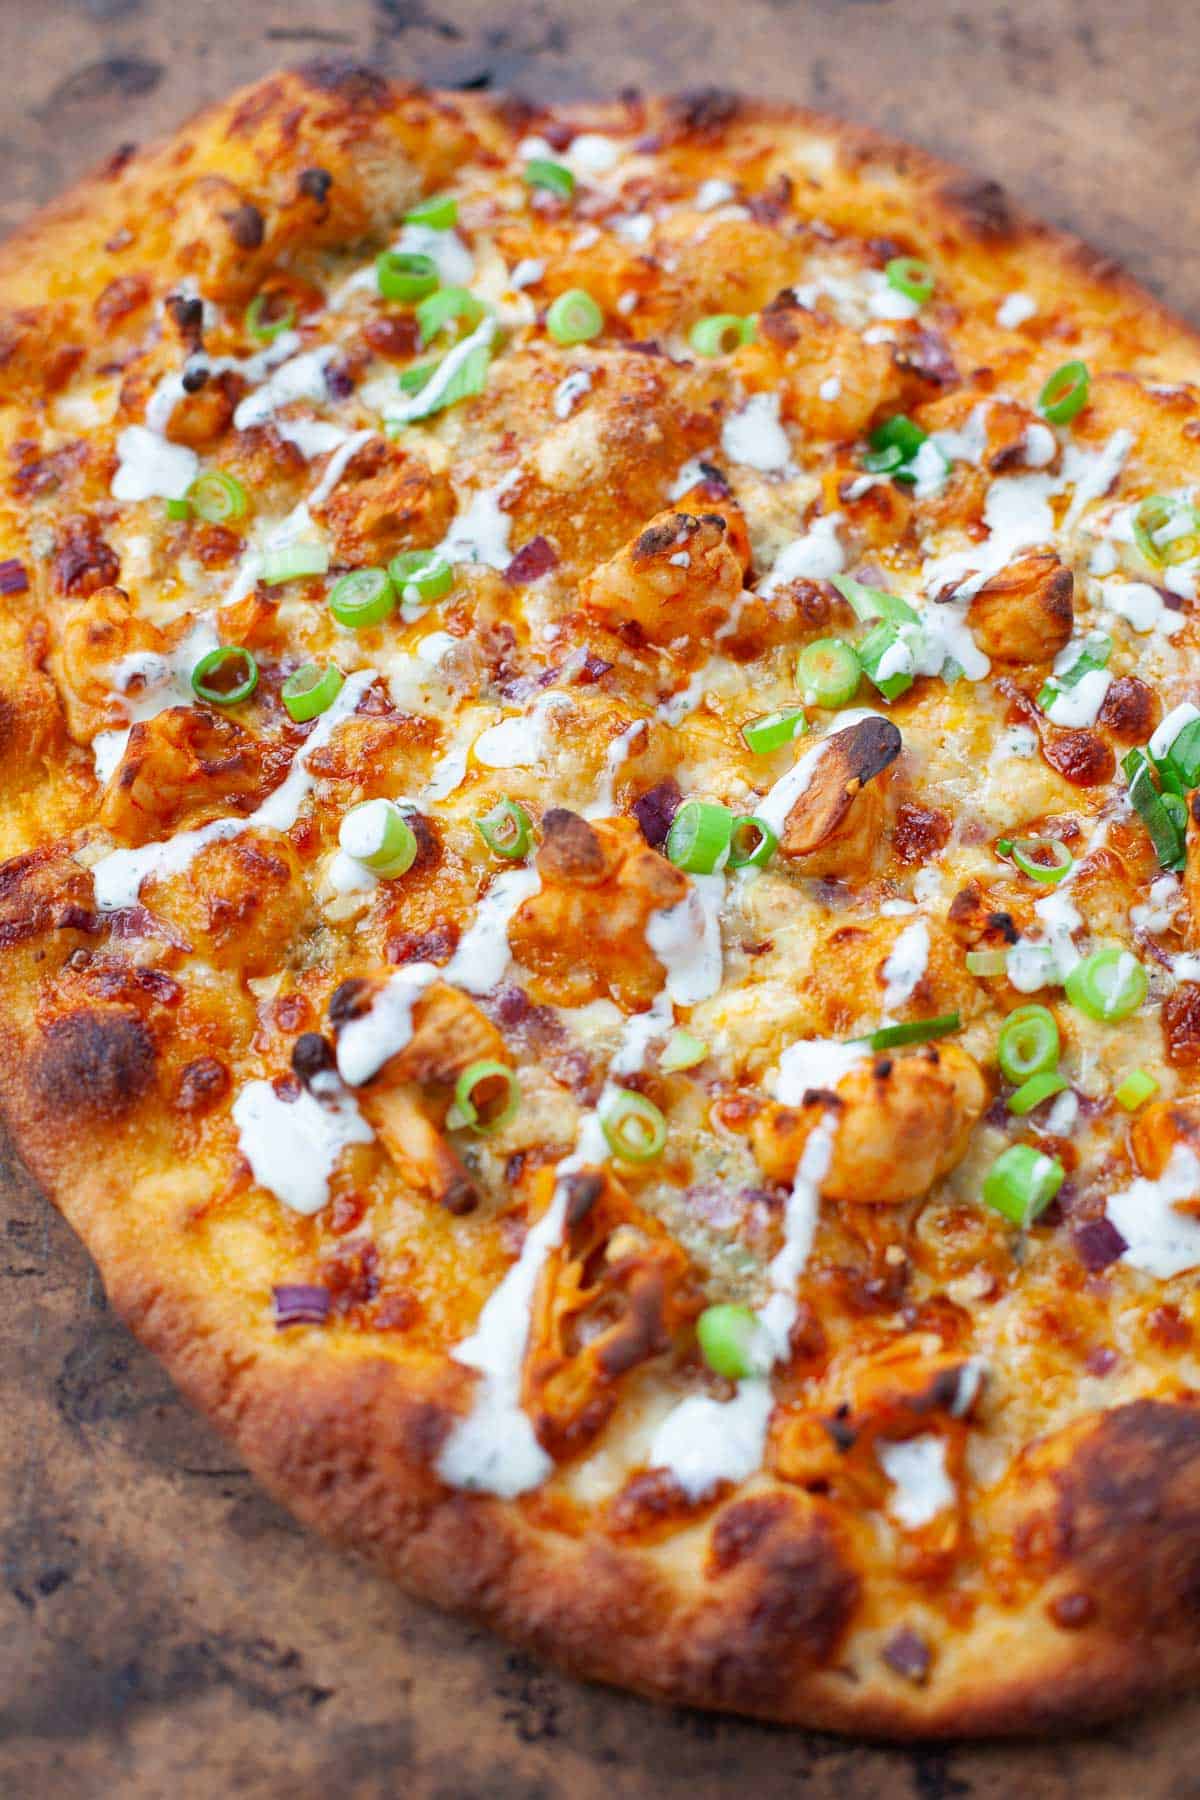 Buffalo cauliflower pizza served fresh out of the oven